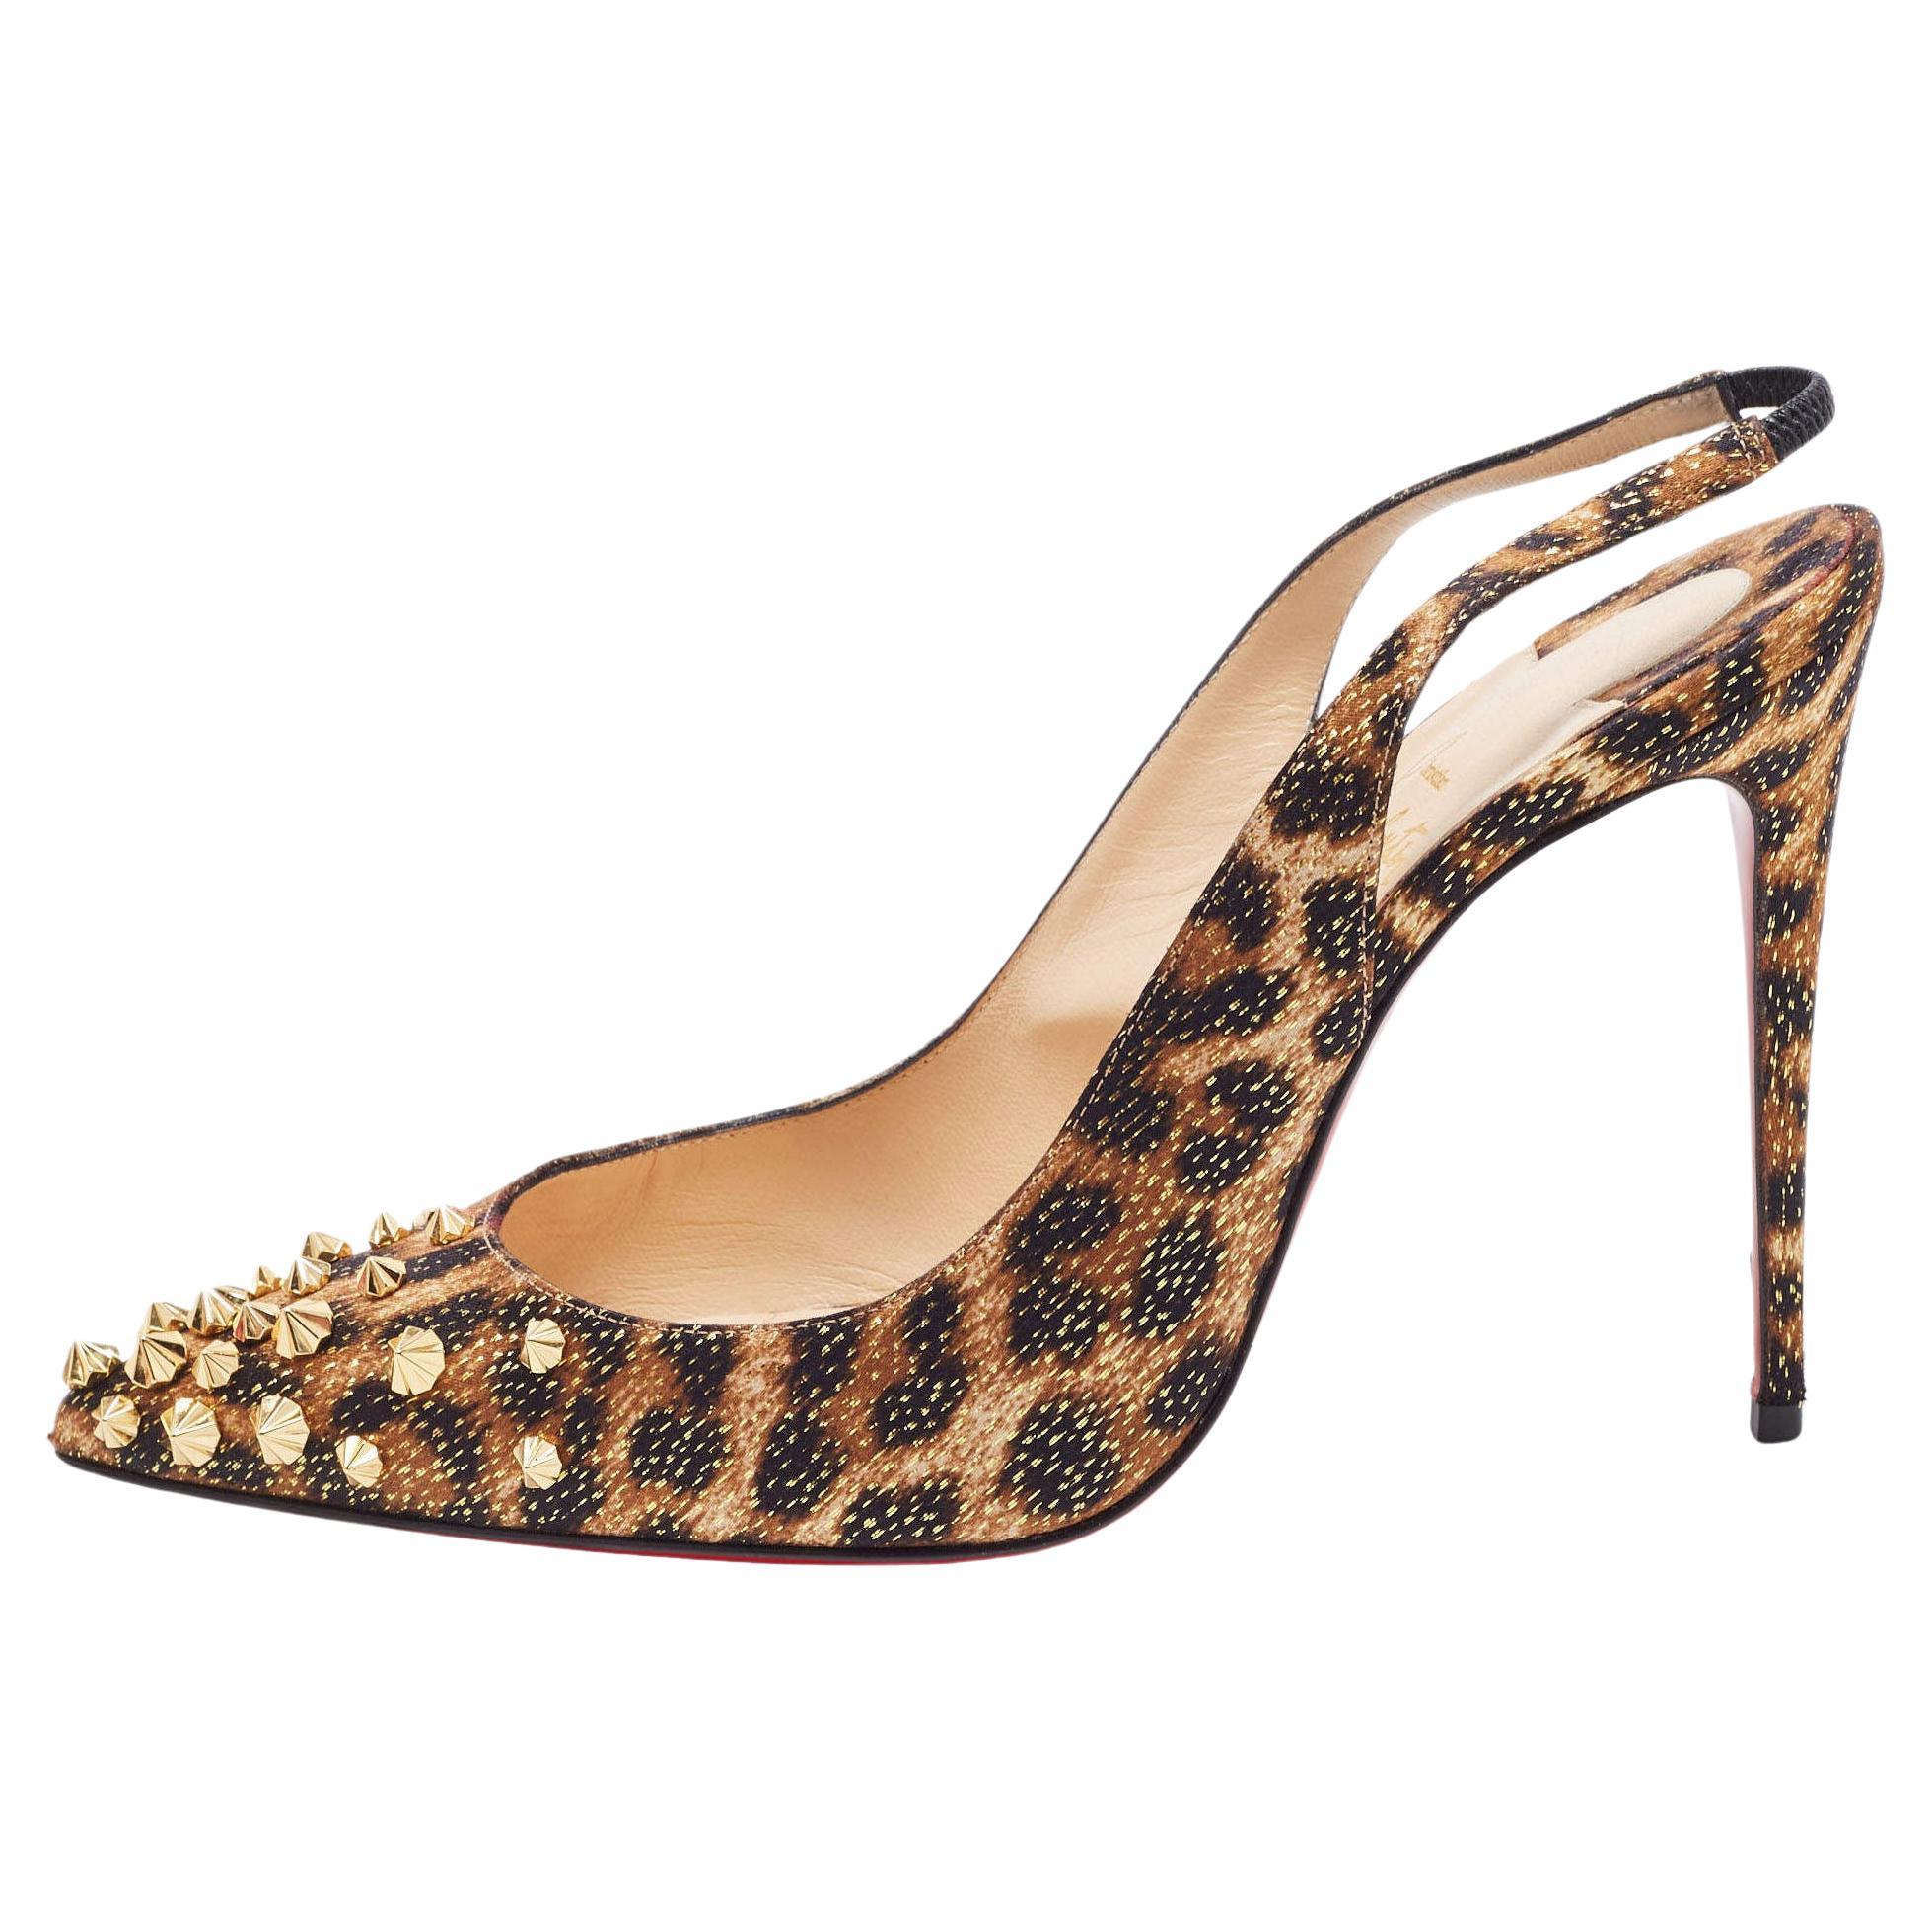 Christian Louboutin Tricolor Leopard Print Satin Spiked Drama Slingback Pumps Si For Sale